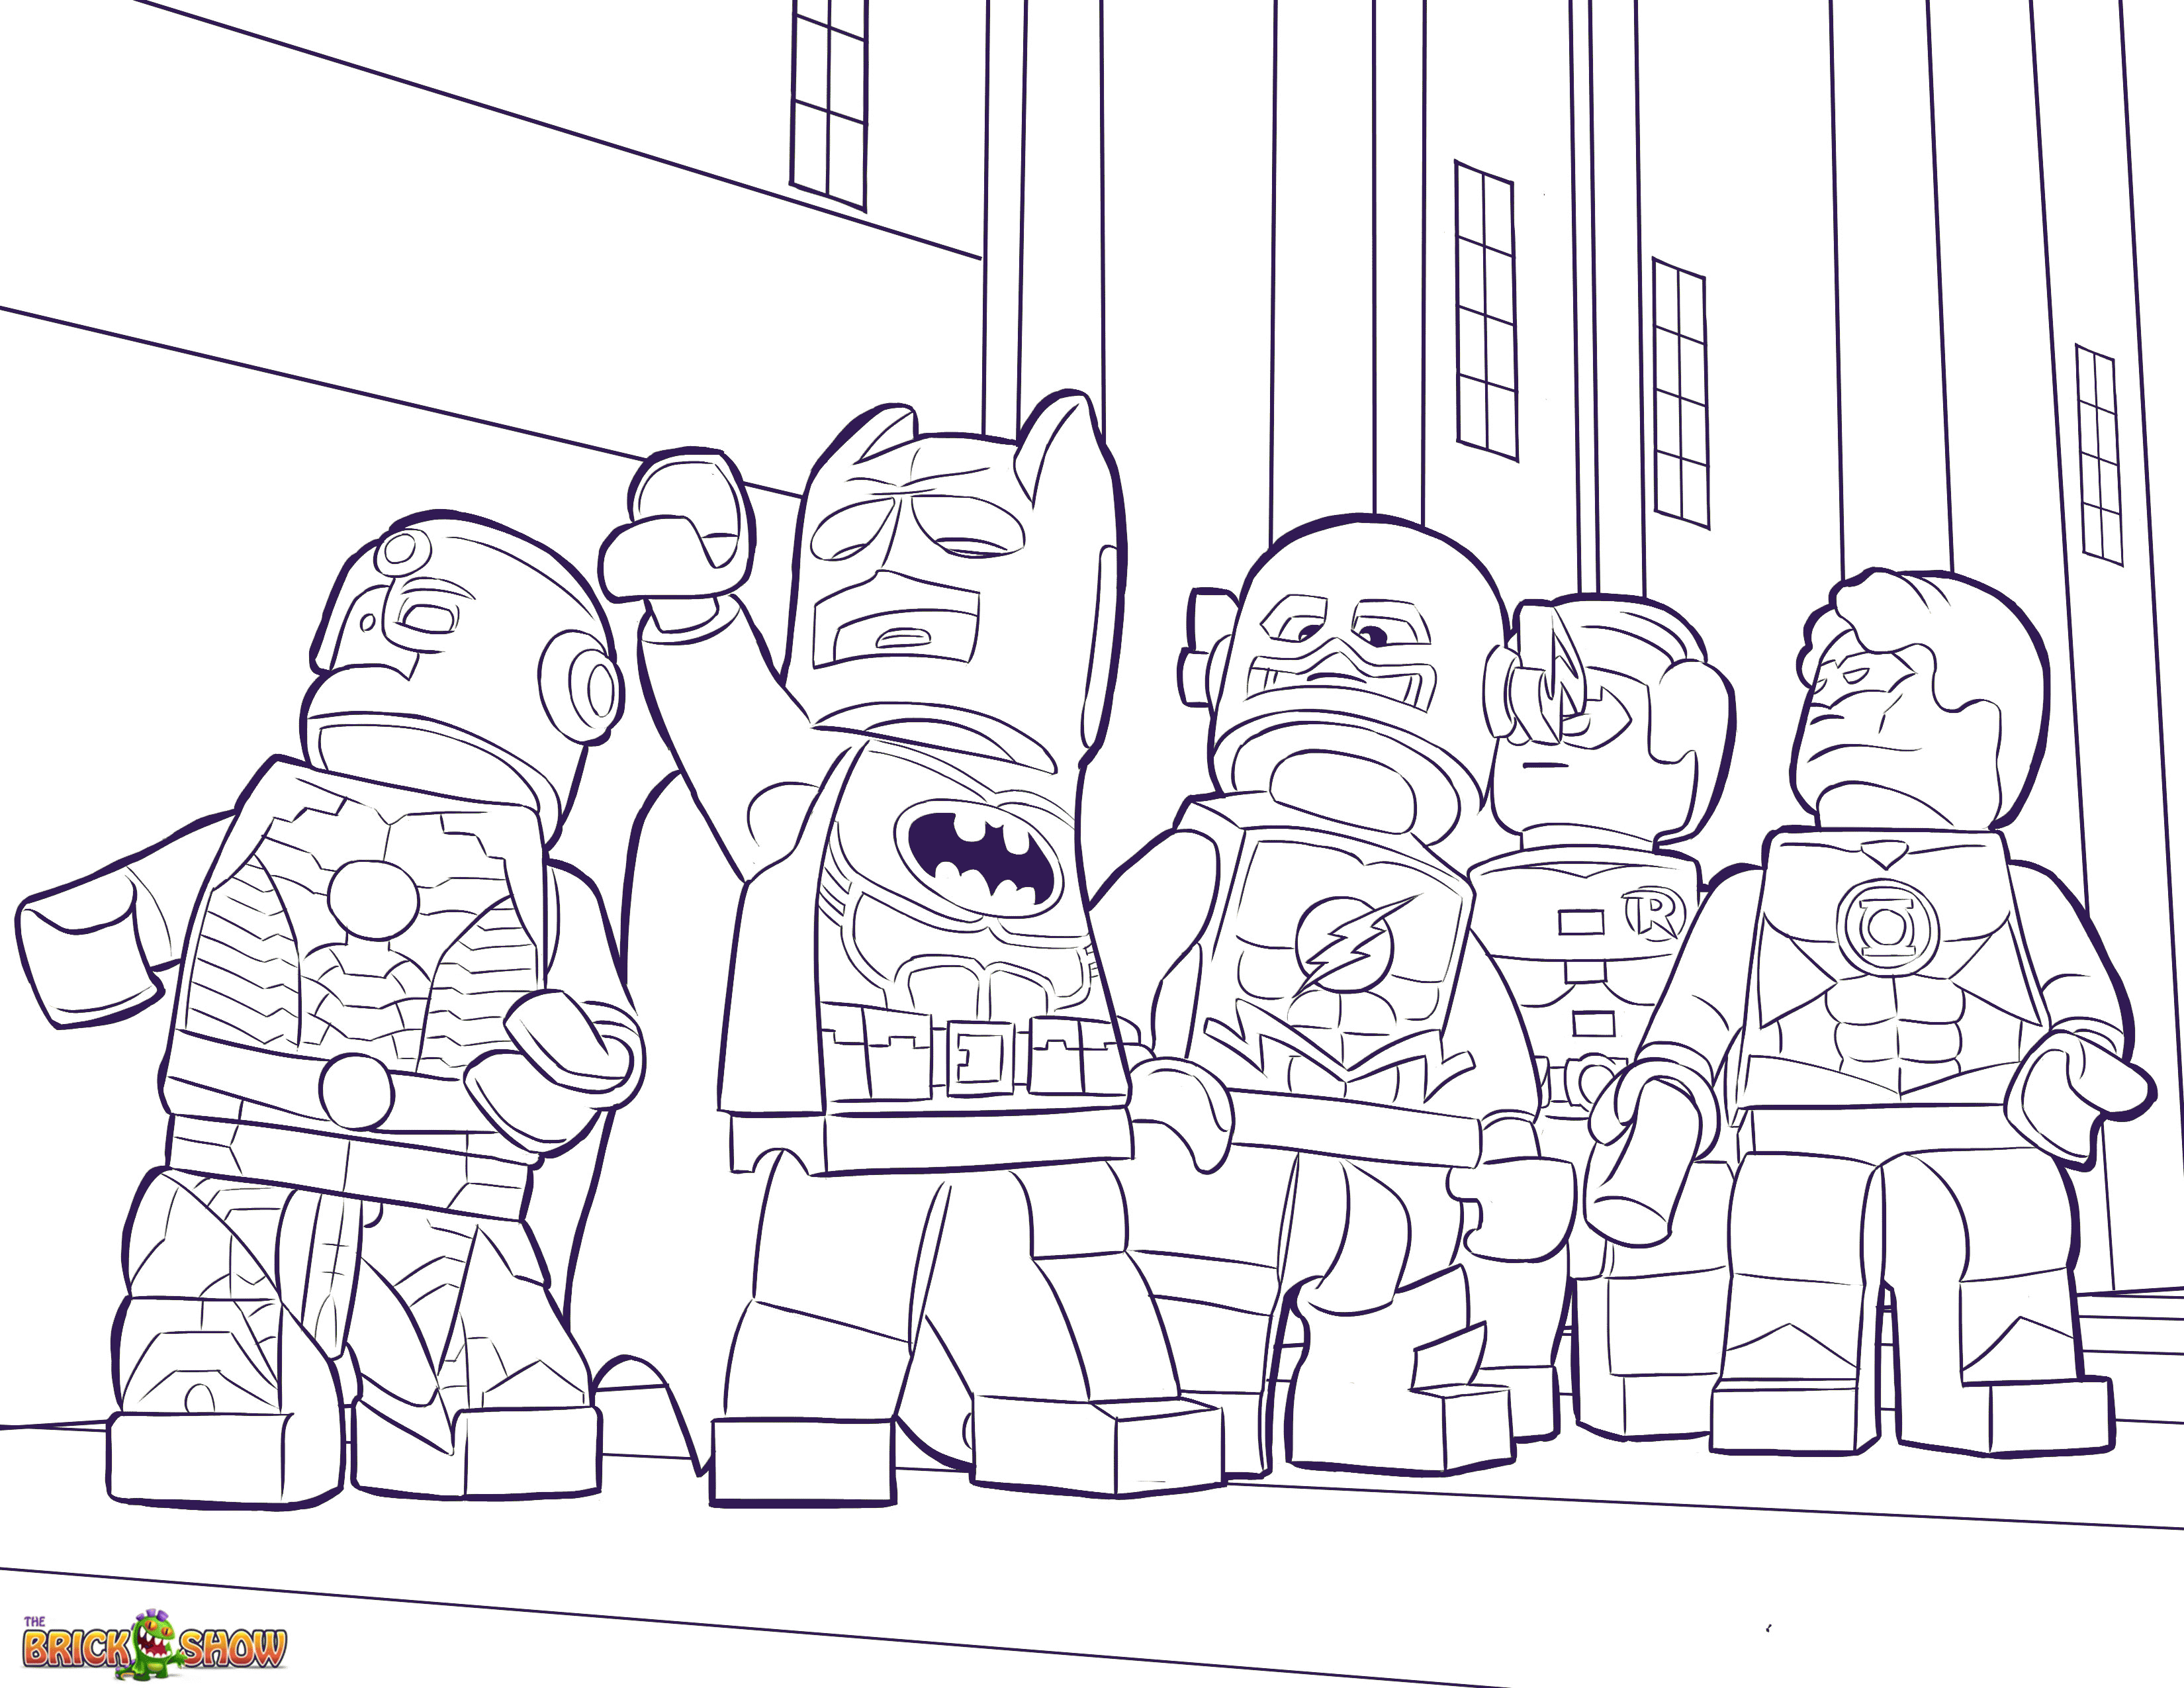 Lego Avengers Coloring Pages - Coloring Page Photos